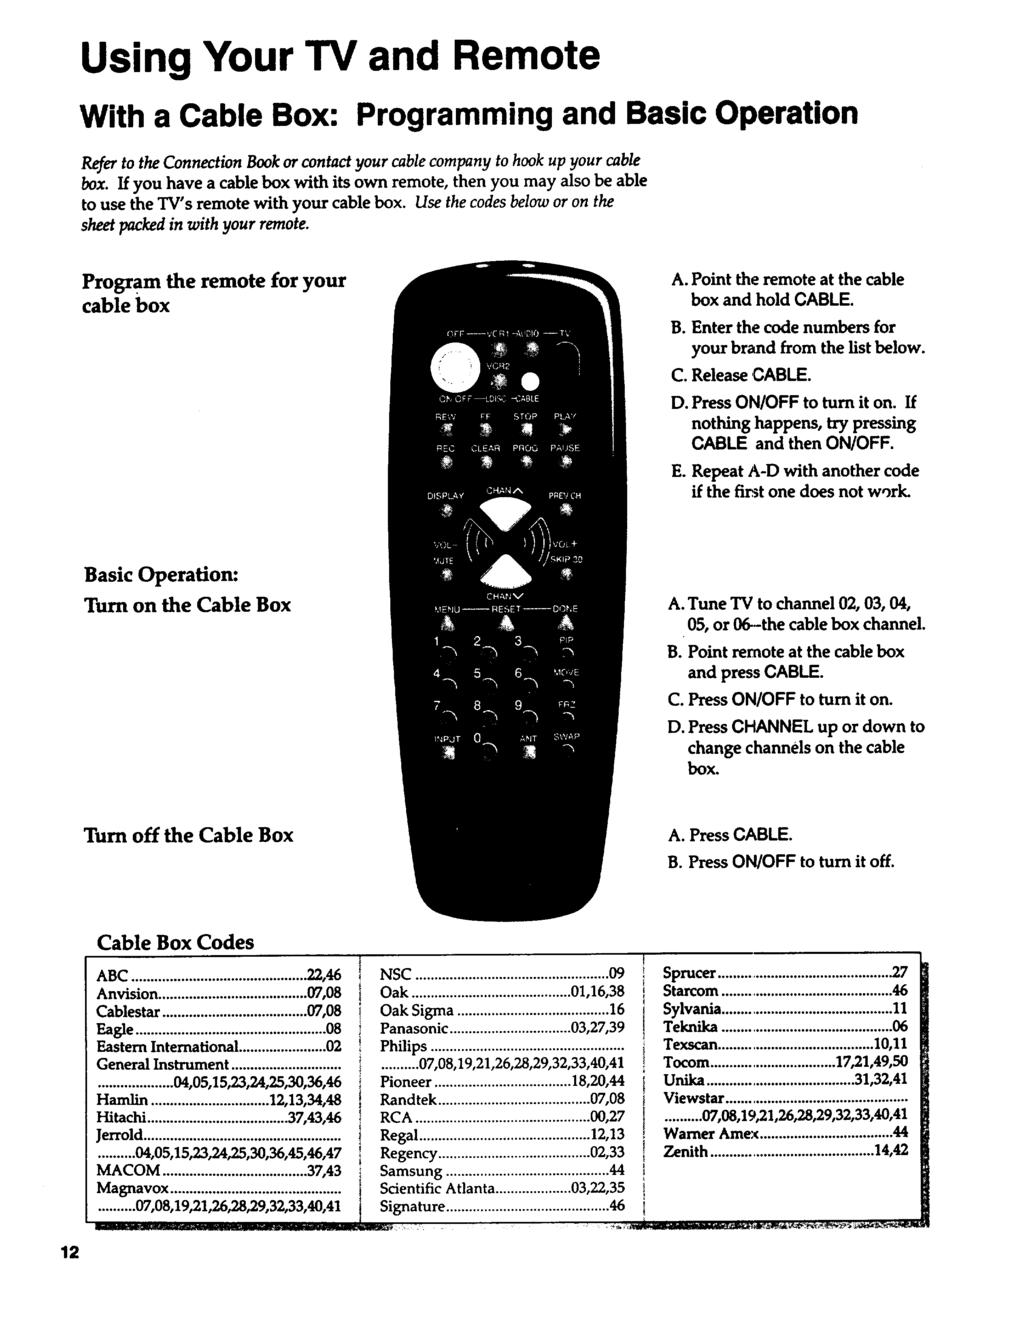 Using Your TV and Remote With a Cable Box: Programming and Basic Operation Refer to the Connection Book or contact your cable company to hook up your cable box.